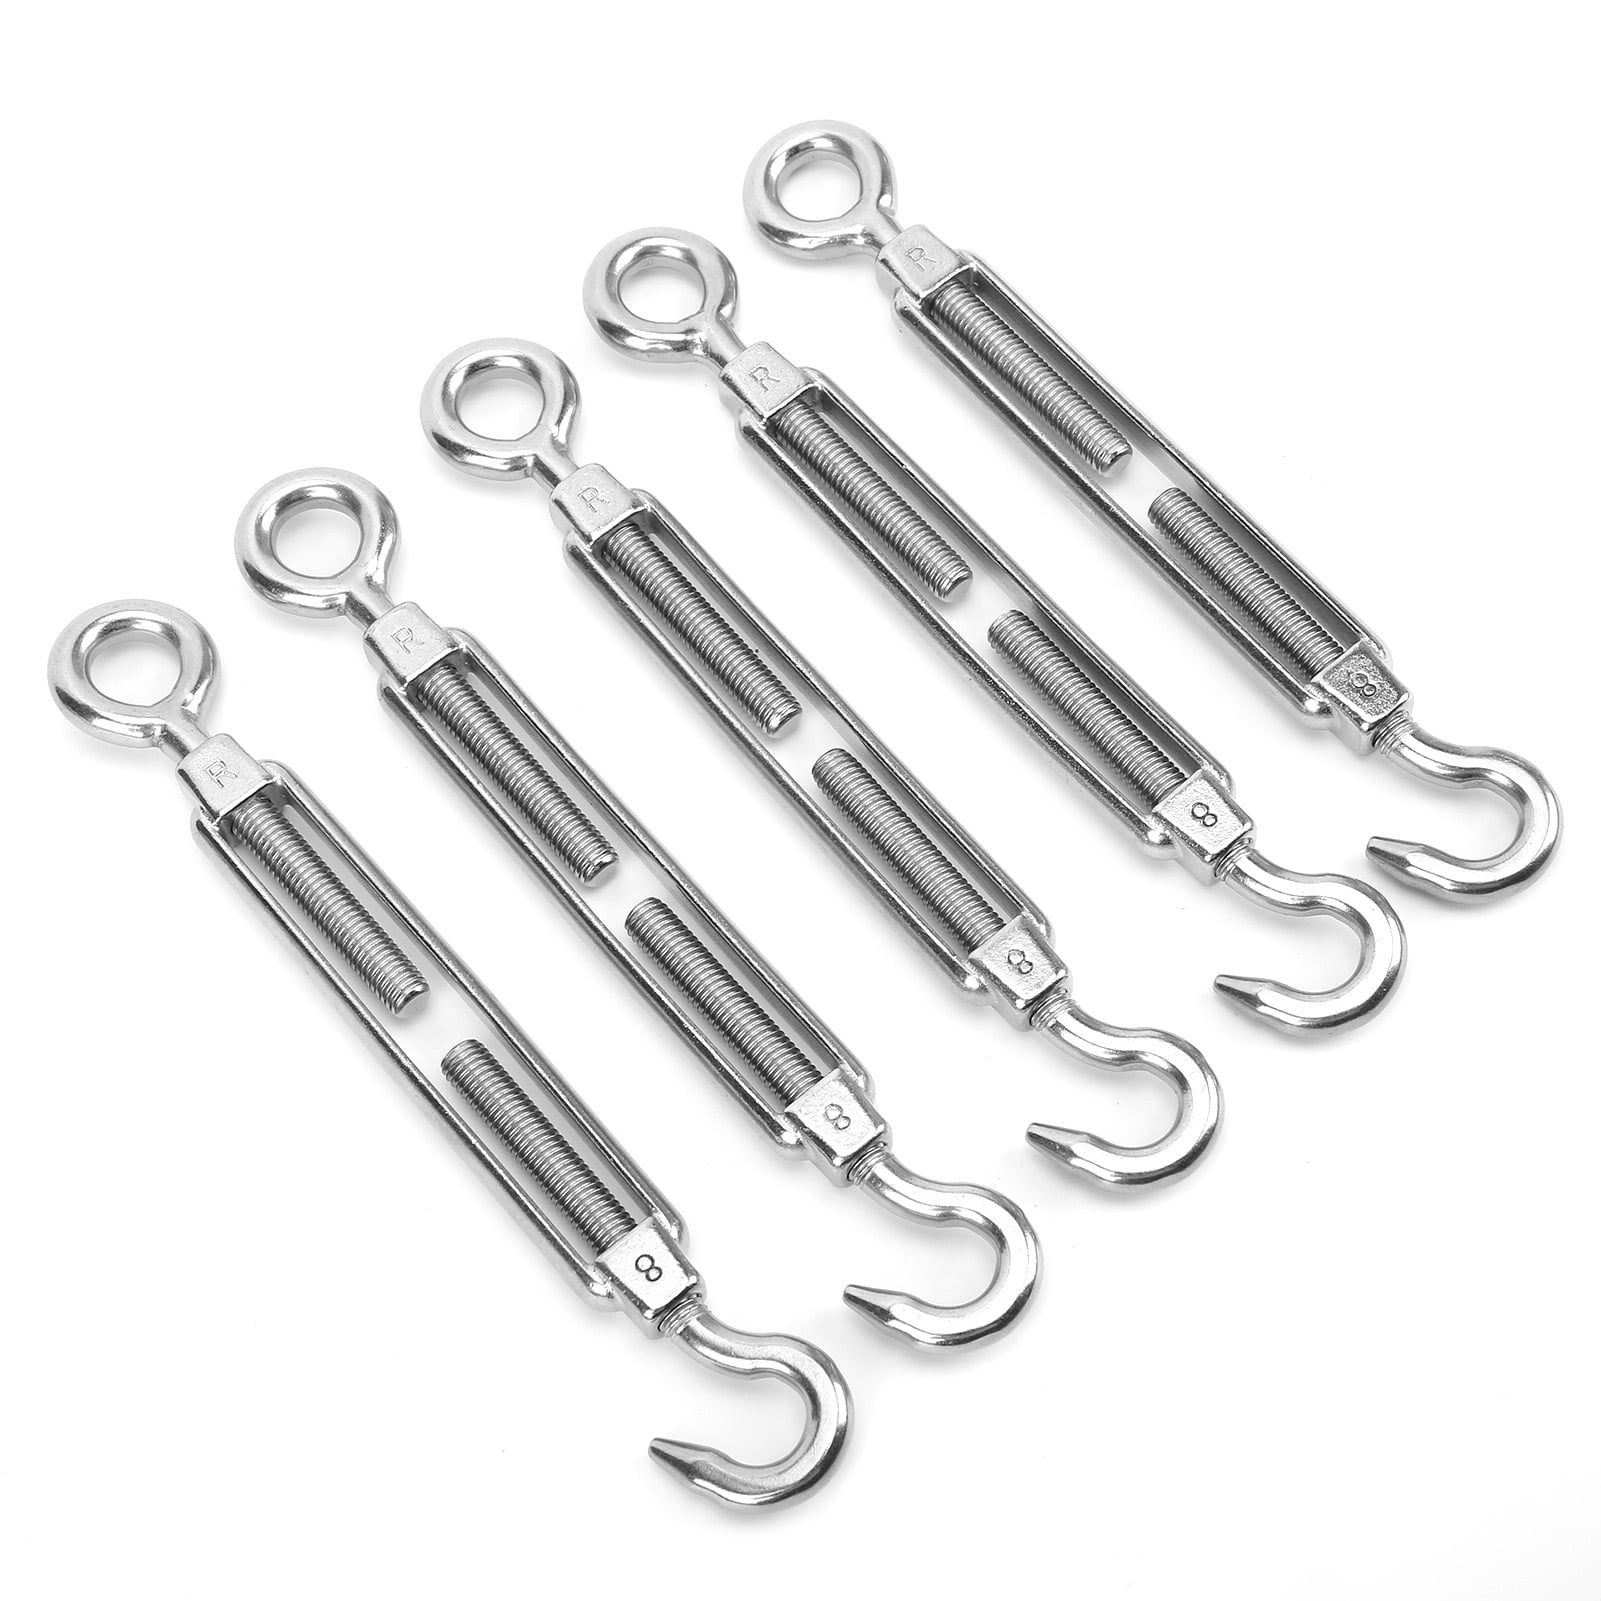 5 x M5 Galvanised HOOK TO HOOK Turnbuckle Chain/Rope/Cable/Wire Strainer Screw 